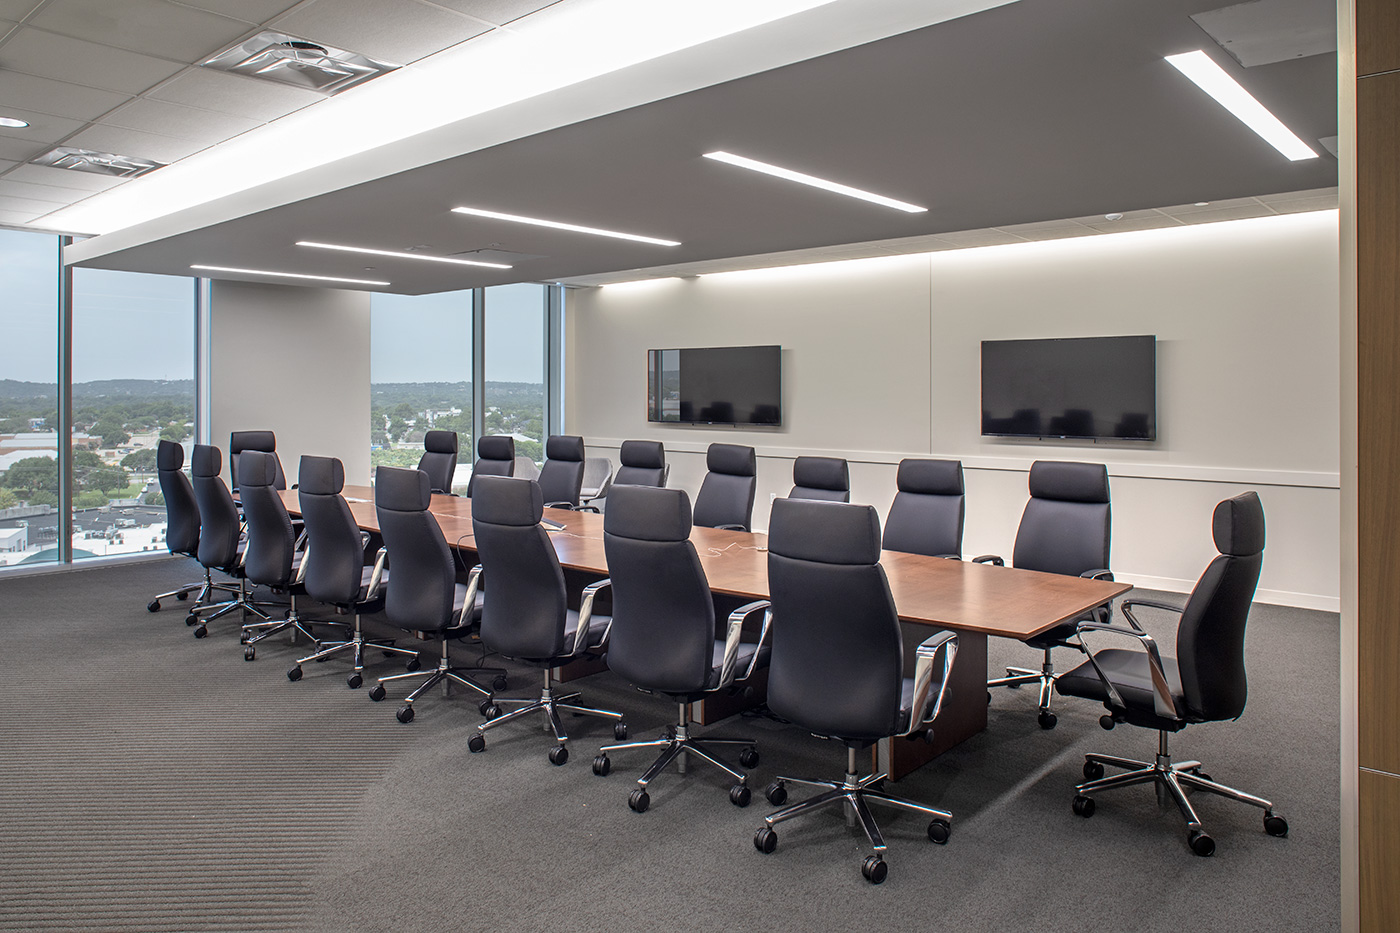 Large conference room with leather chairs.